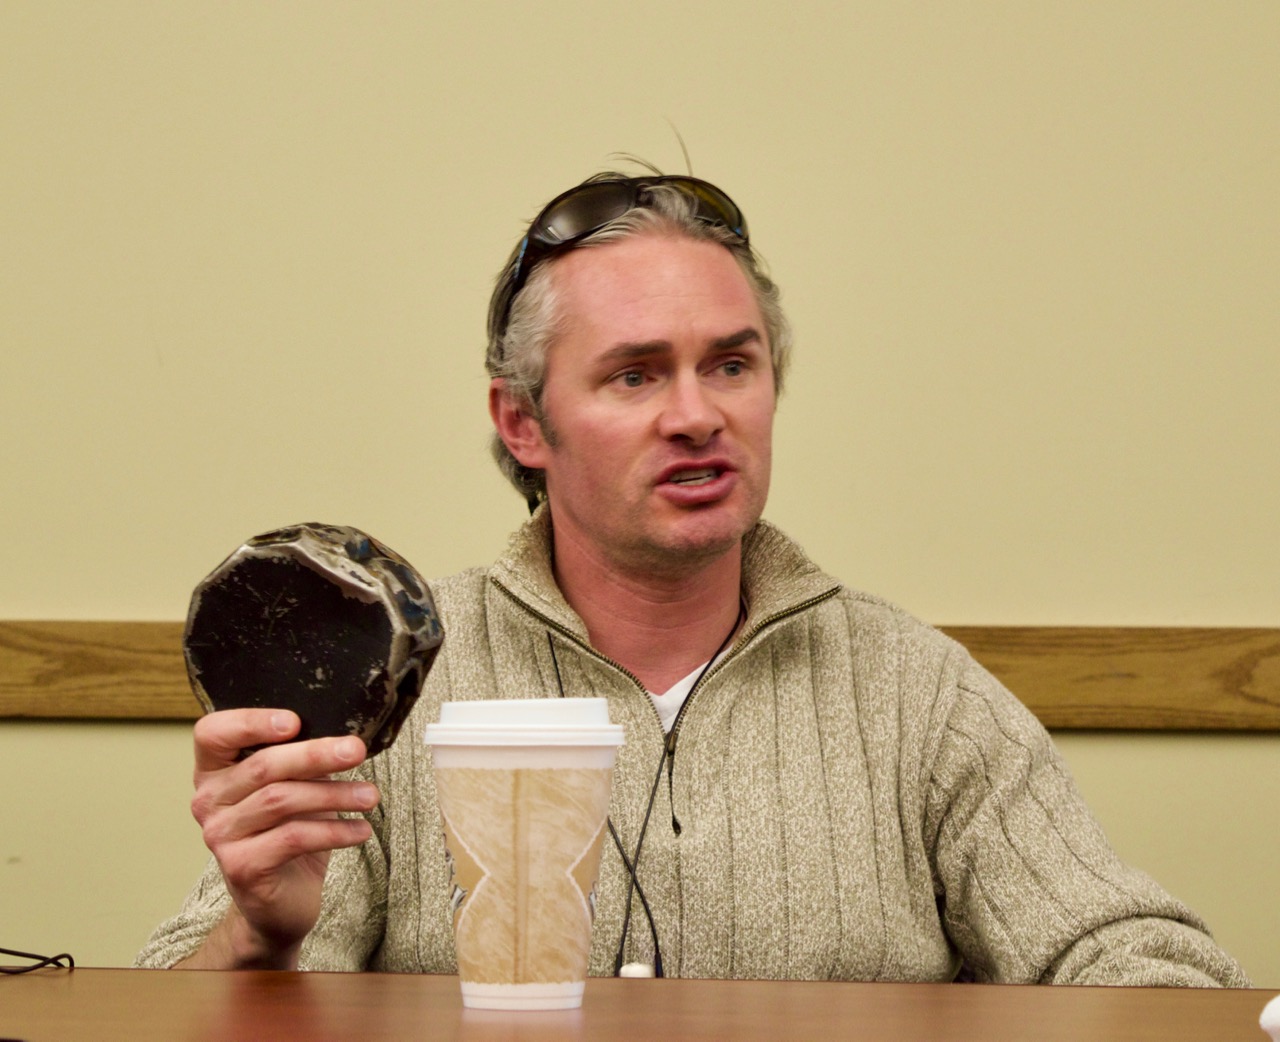 Craig Fitzpatrick holds up an adapted hockey puck while he gives a talk about Blind Hockey at the Colorado Center for the Blind